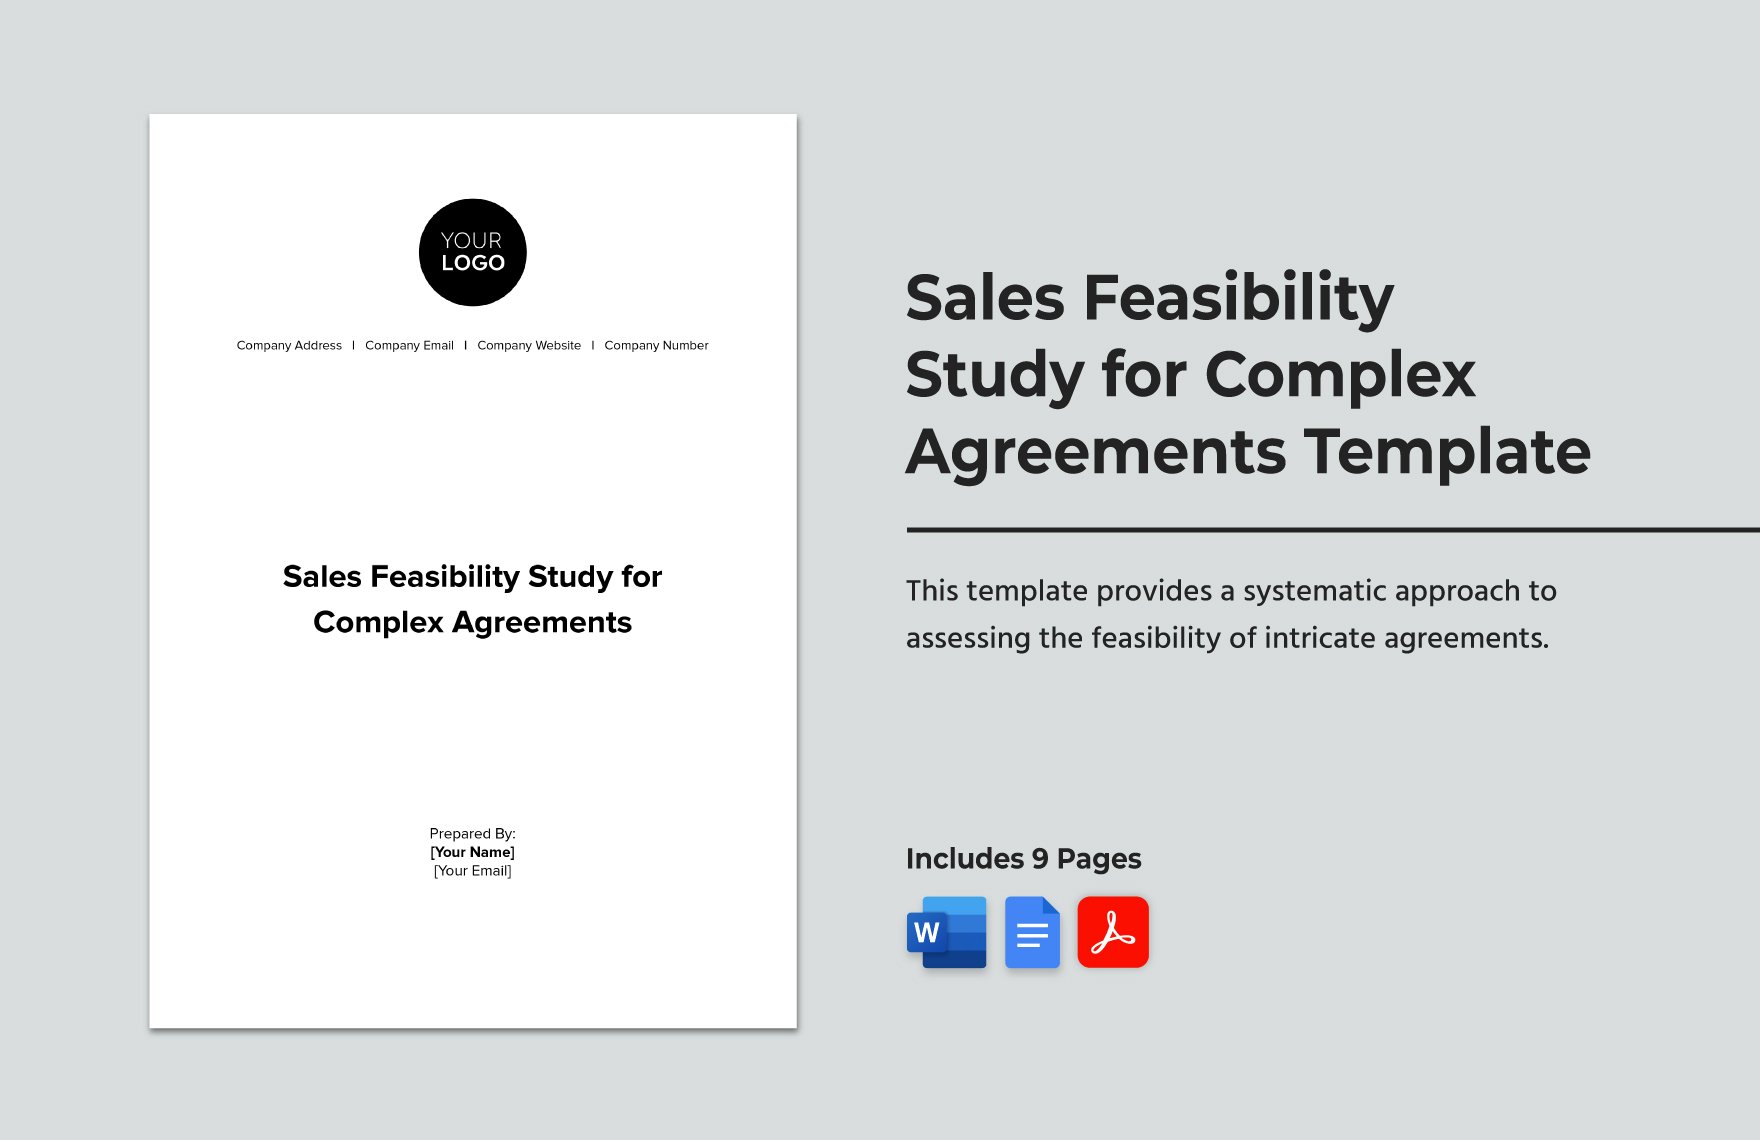 Sales Feasibility Study for Complex Agreements Template 